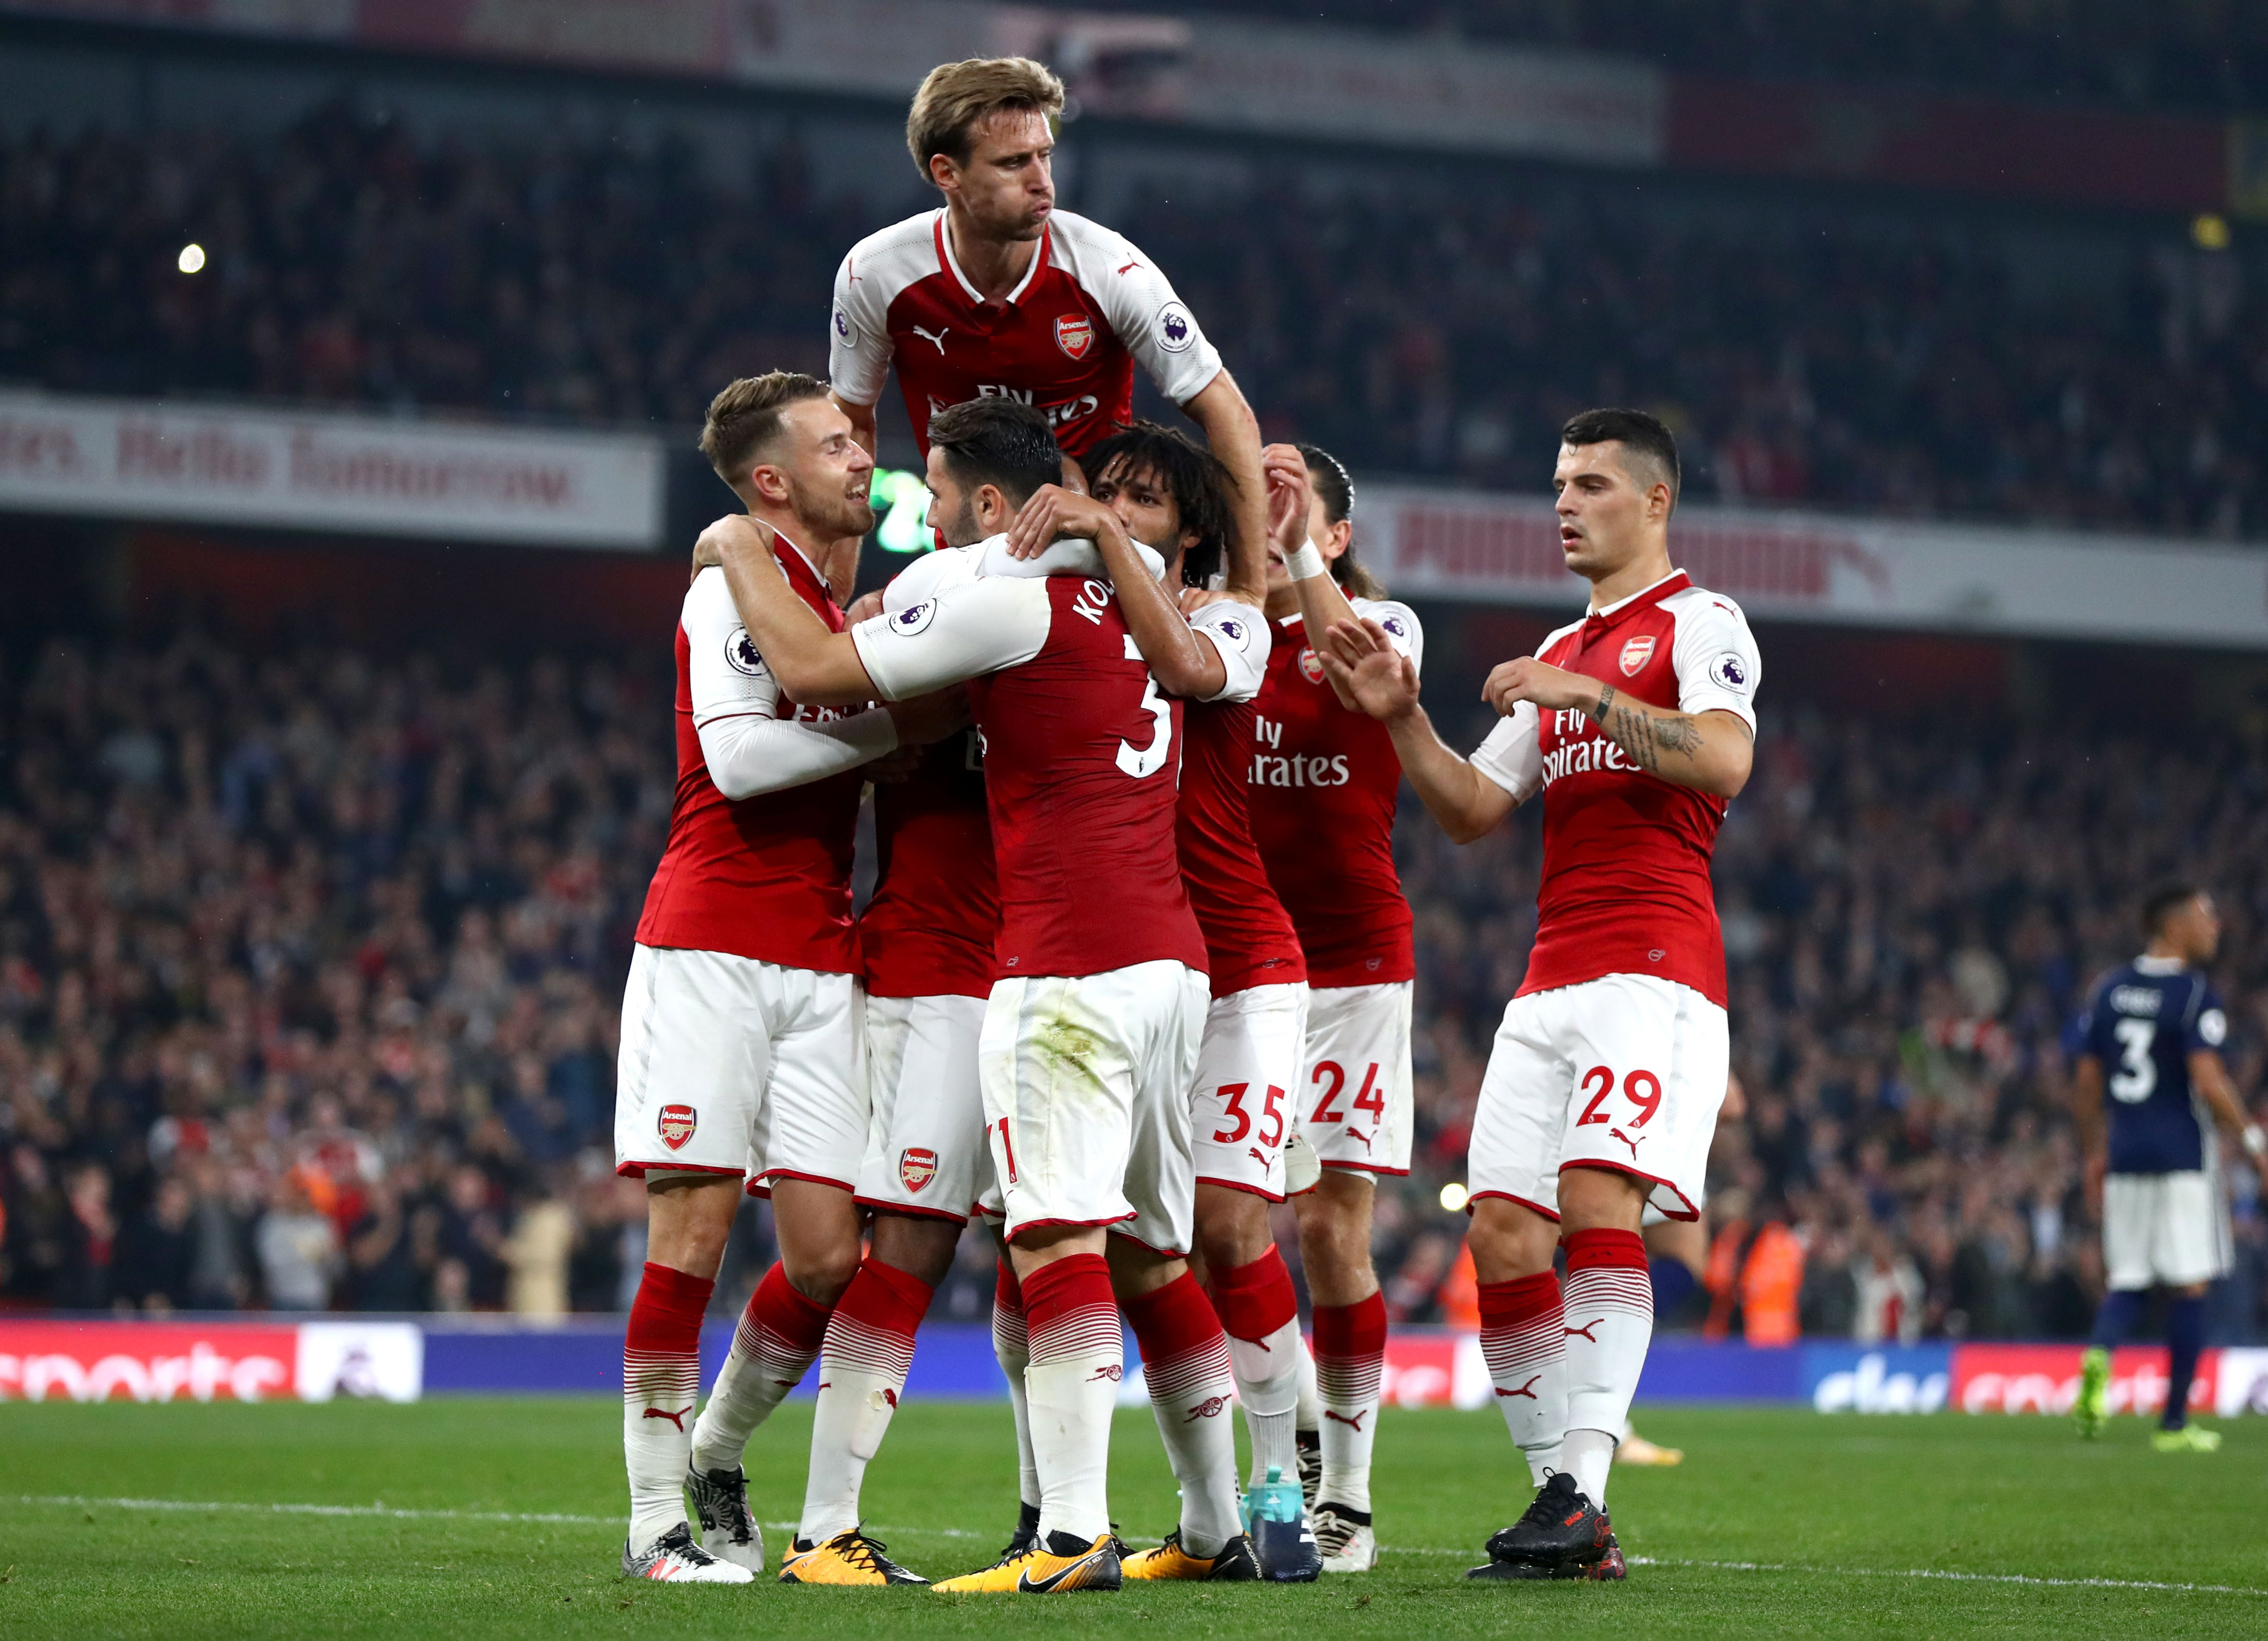 LONDON, ENGLAND - SEPTEMBER 25:  Alexandre Lacazette of Arsenal (obscured) celebrates with team mates as he scores their second goal from a penalty during the Premier League match between Arsenal and West Bromwich Albion at Emirates Stadium on September 25, 2017 in London, England.  (Photo by Michael Steele/Getty Images)